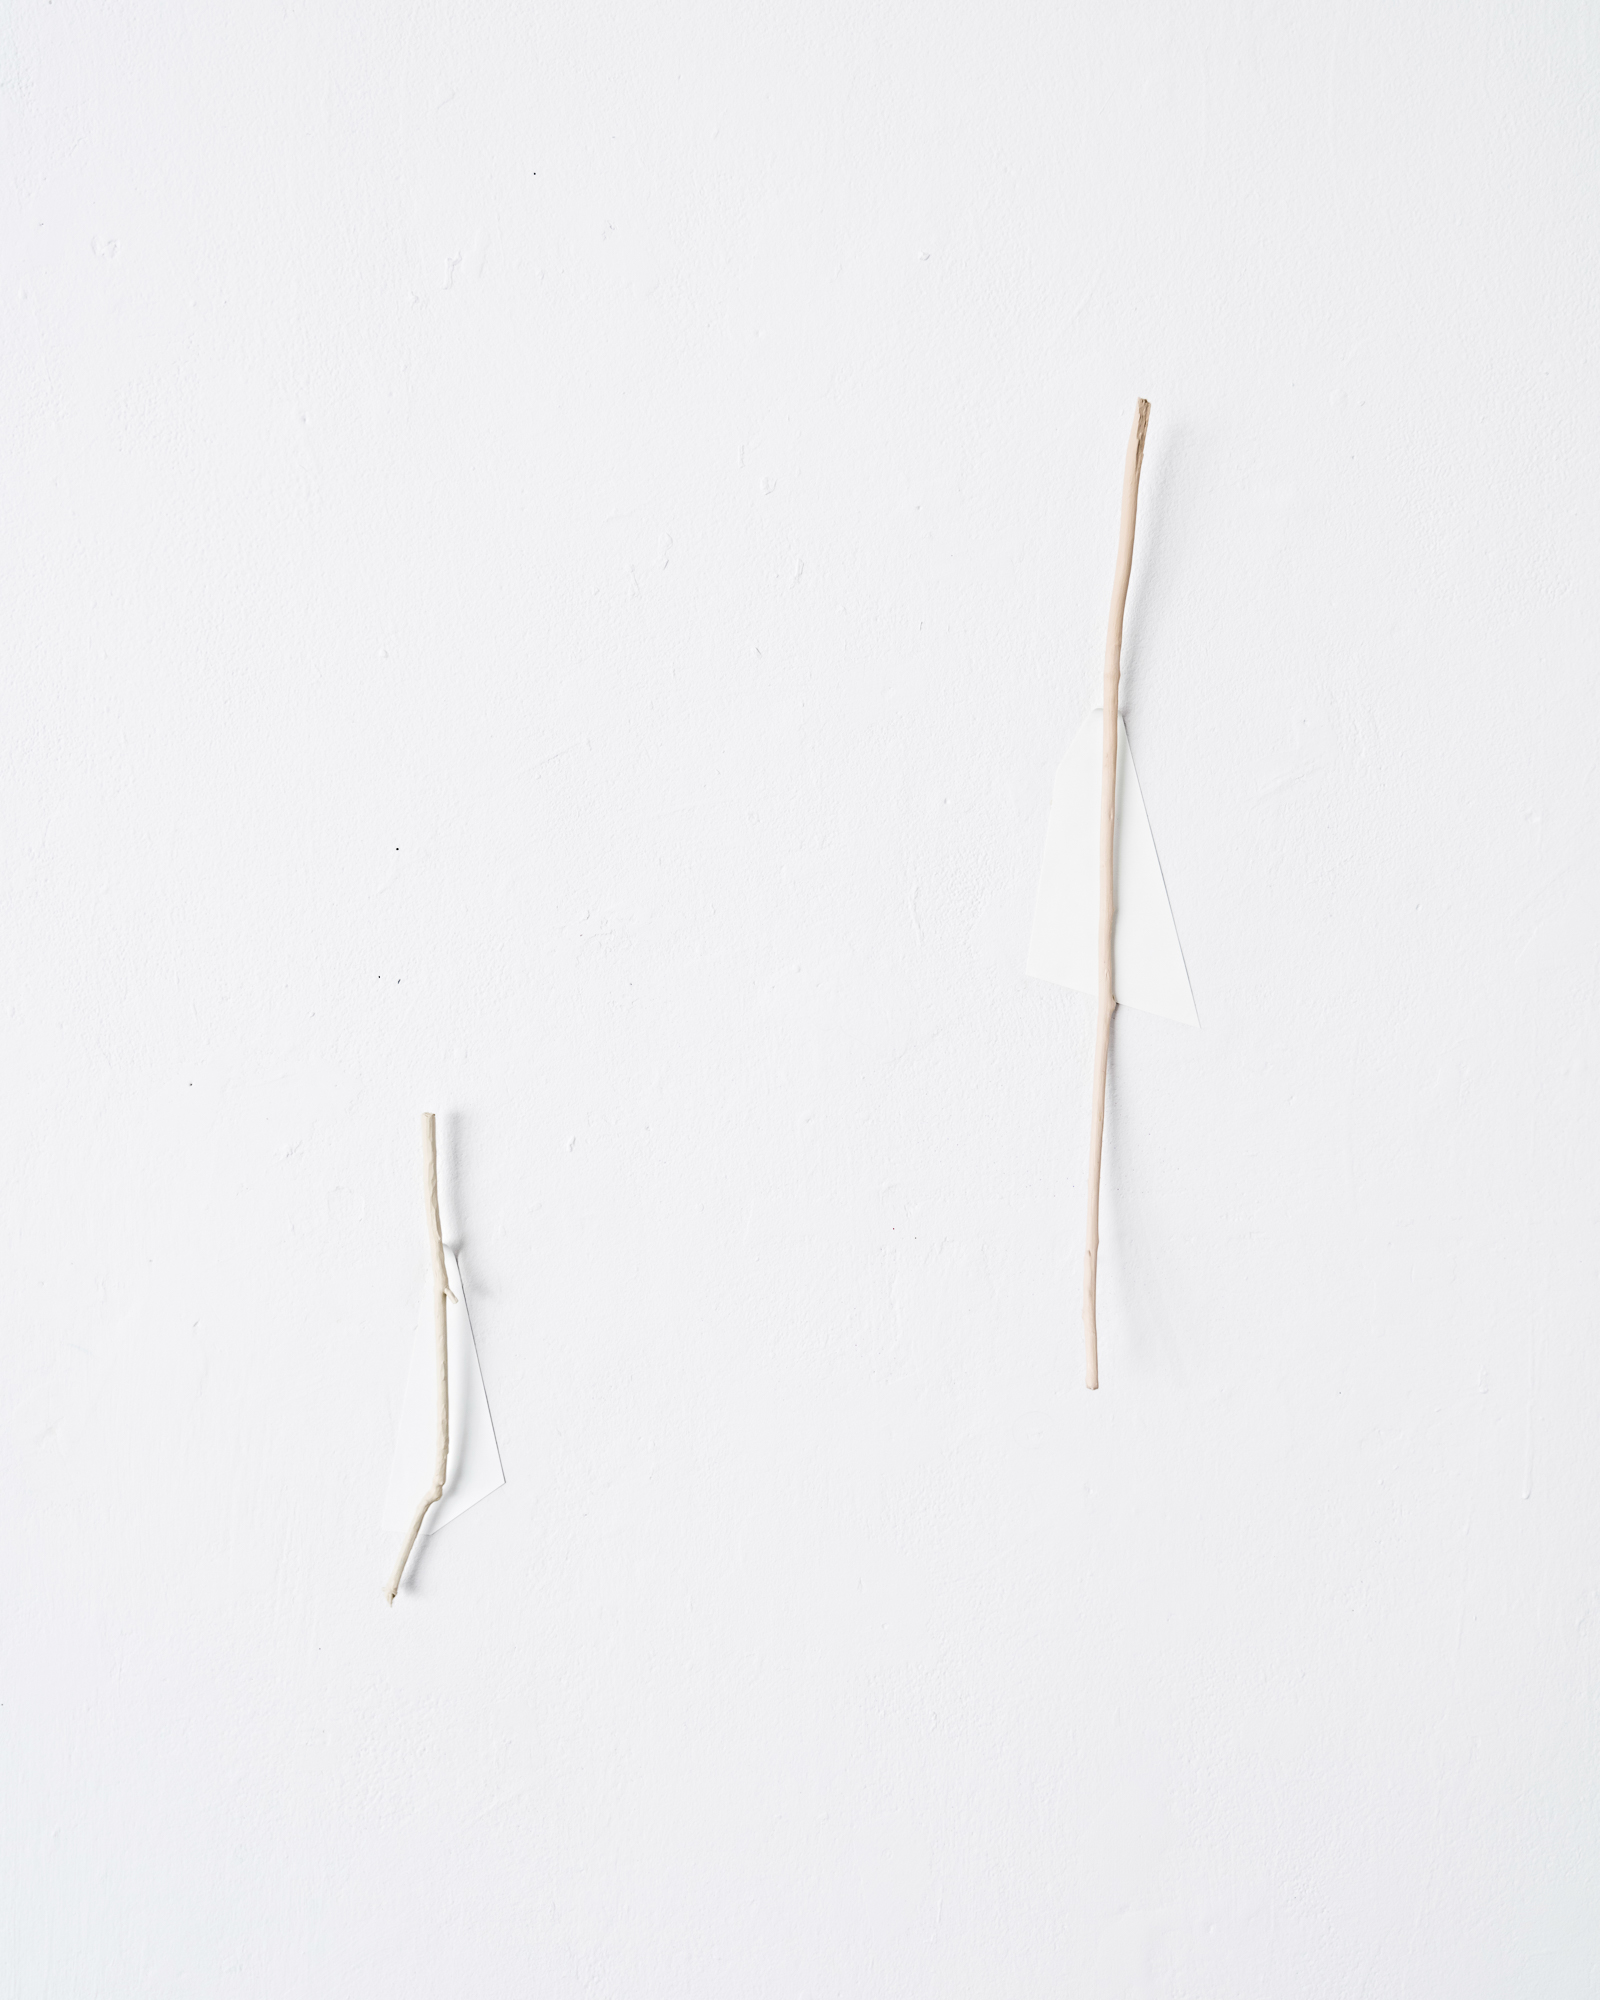   Limb Drop,&nbsp; dimensions vary,&nbsp;acrylic paint on found twigs, acrylic paint on paper, 2016. Detail   The State of a Small Sky , Zavitiz Gallery, 2016  Documentation by Peter Denton 